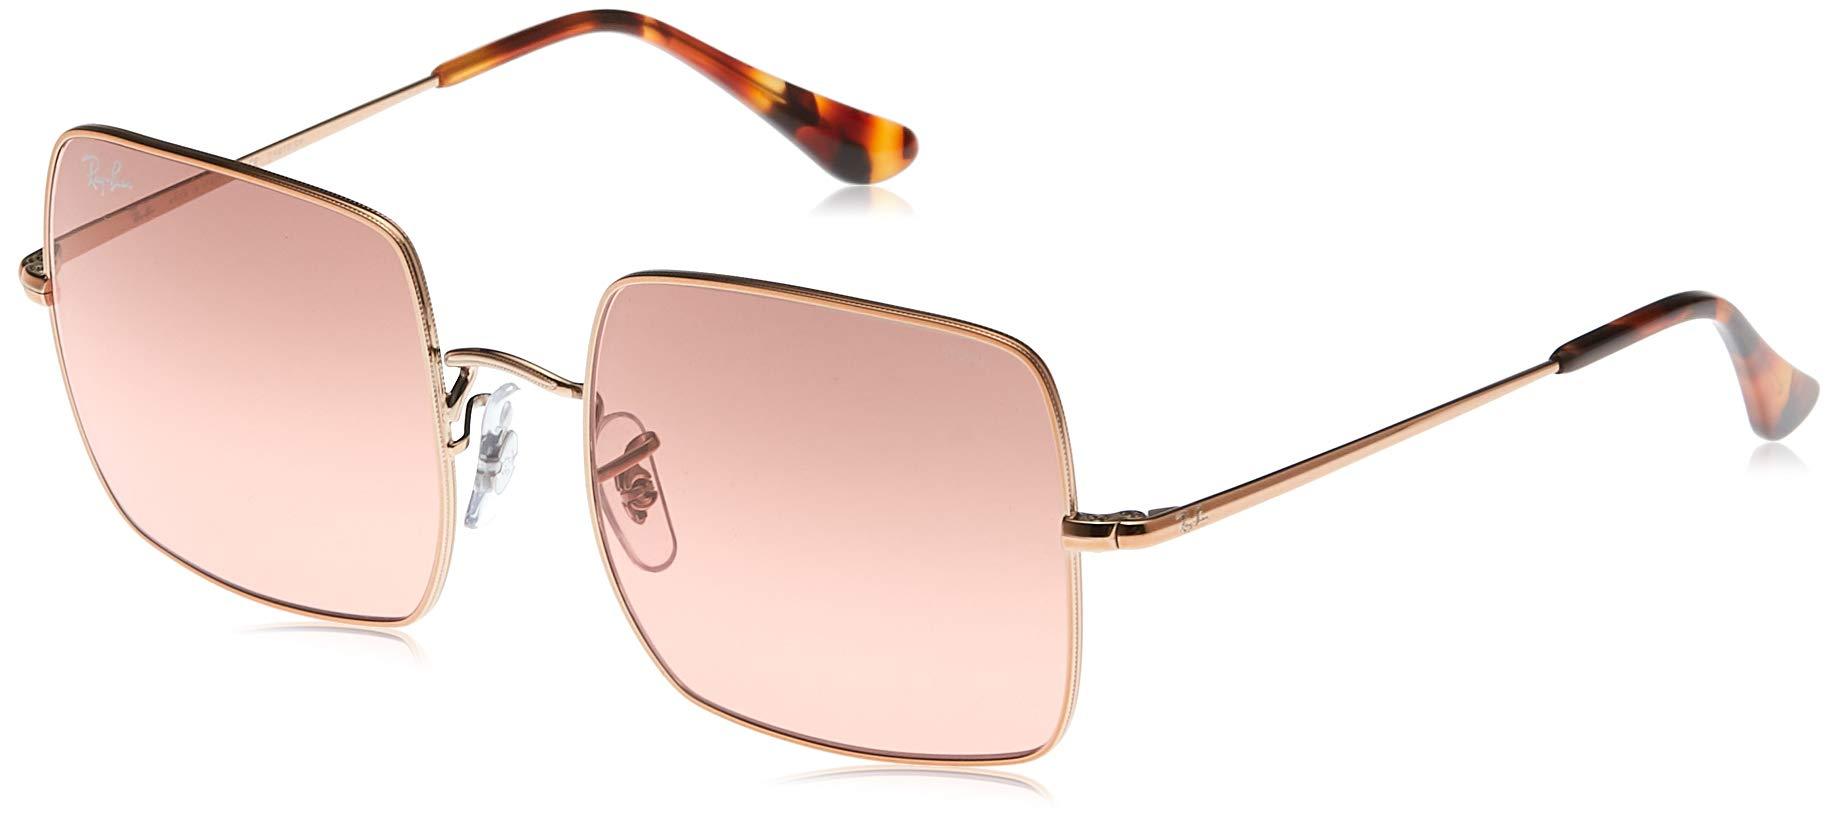 Ray-Ban Rb1971 Evolve Metal Polarized Square Sunglasses in Pink - Save 22%  - Lyst